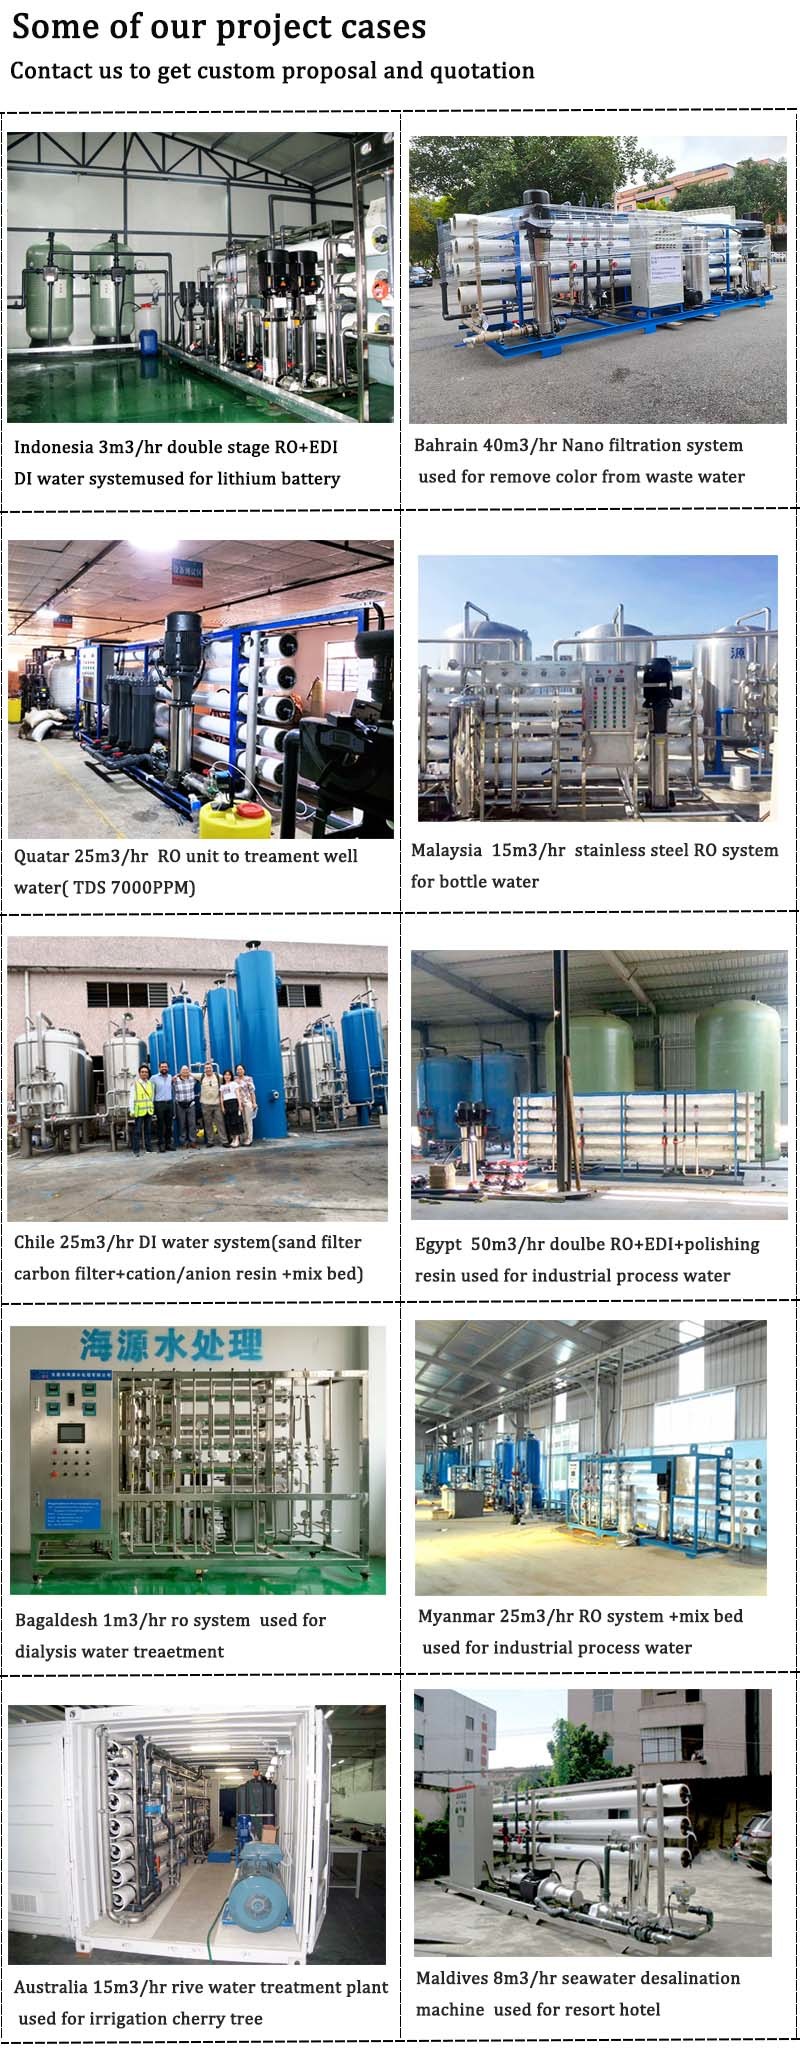 Salt Water Softening Machine Automatic Electronic Resin Hard Water Softener System for Home or Industrial